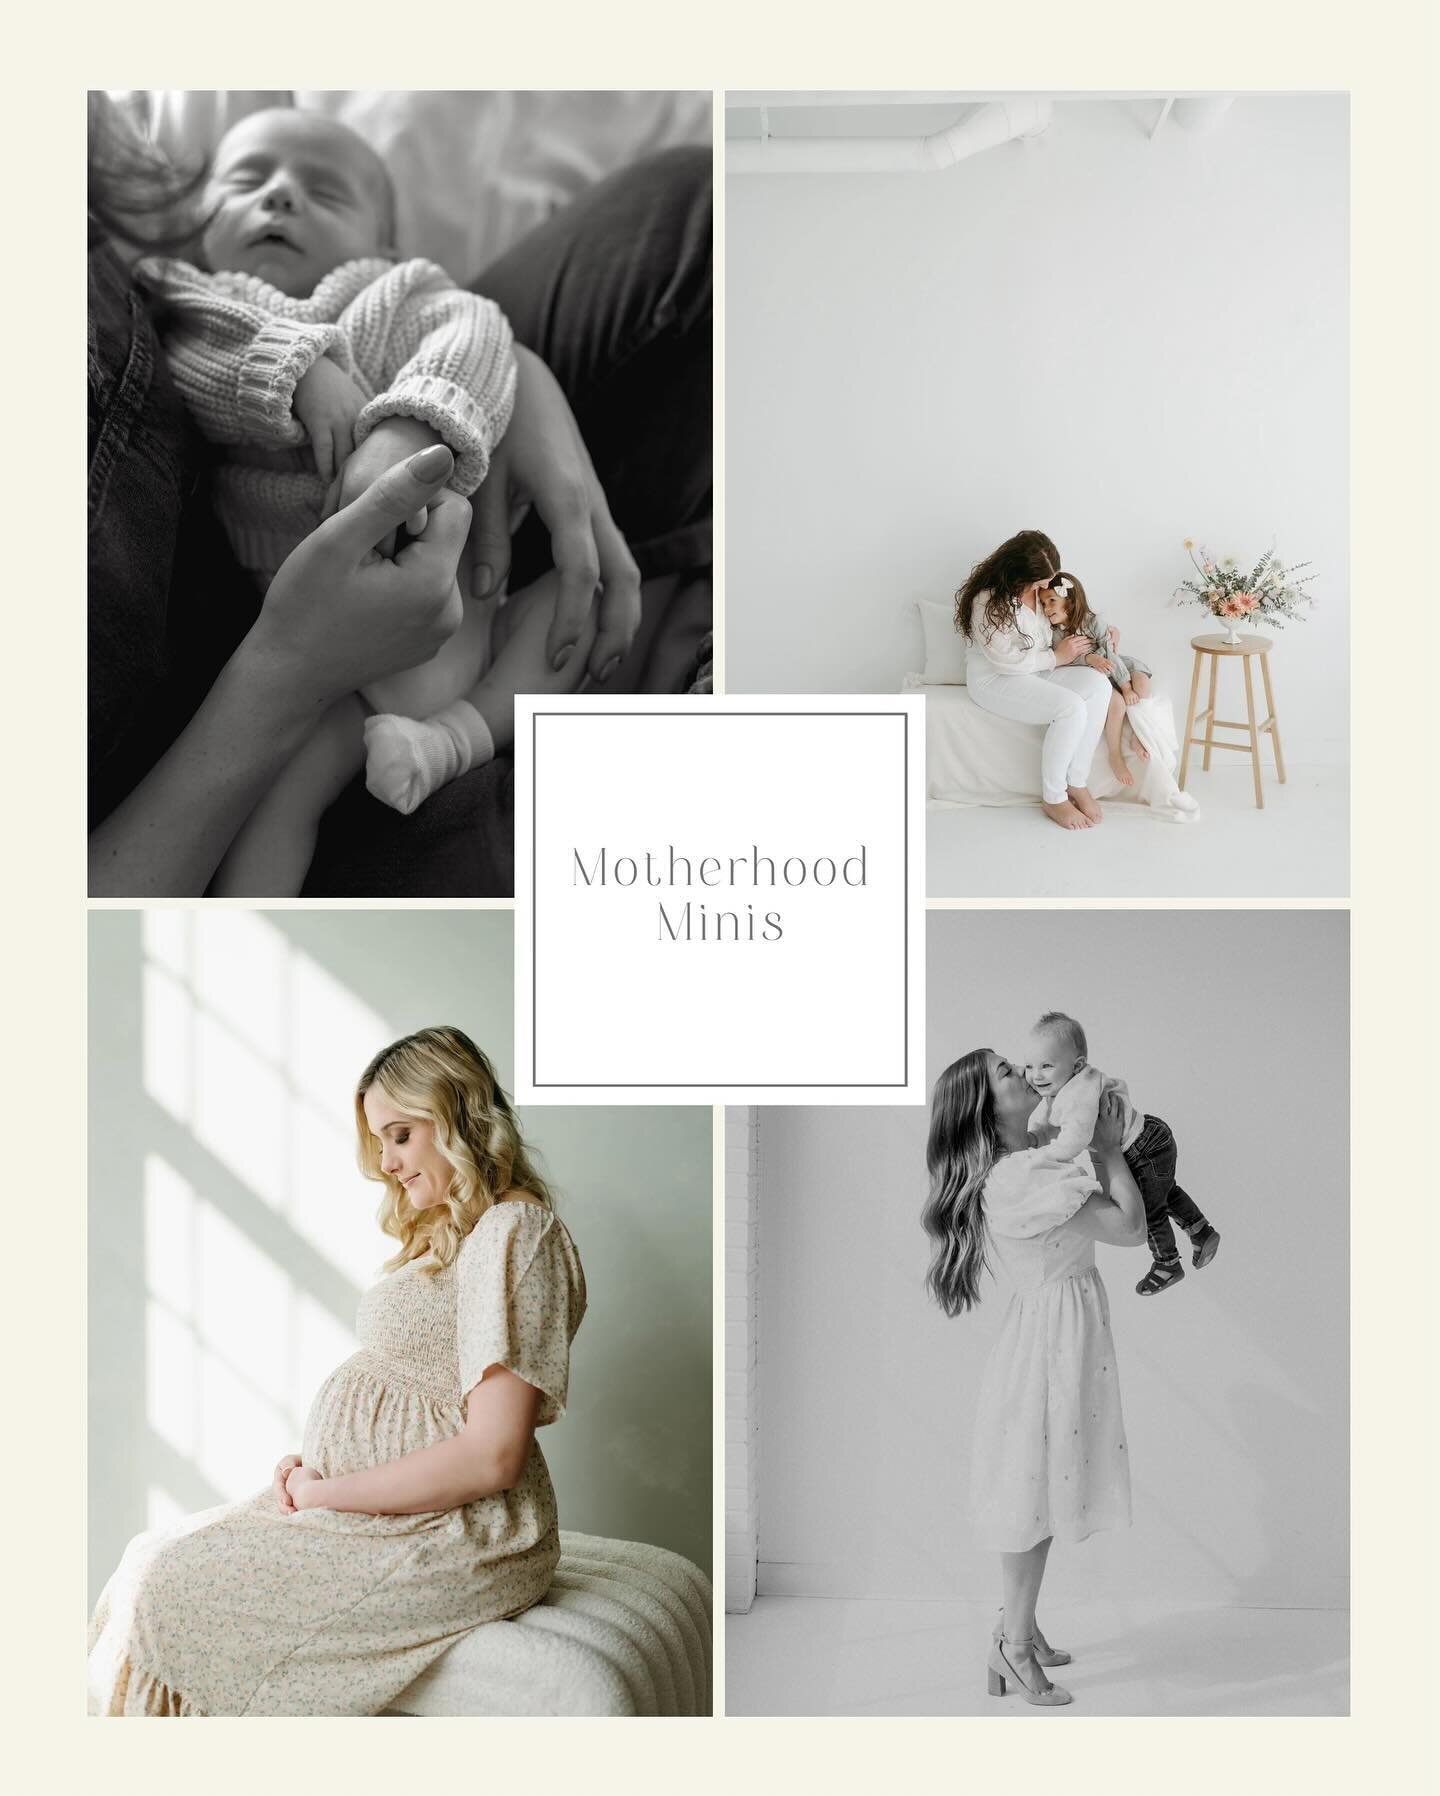 MOTHERHOOD MINIS - Saturday April 27th from 1-5pm. At the beautiful @thestudystudios in downtown Calgary 🖤

Celebrate Motherhood with a Mother&rsquo;s Day Mini Session! Treat yourself or a loved one by gifting them with images they will treasure for